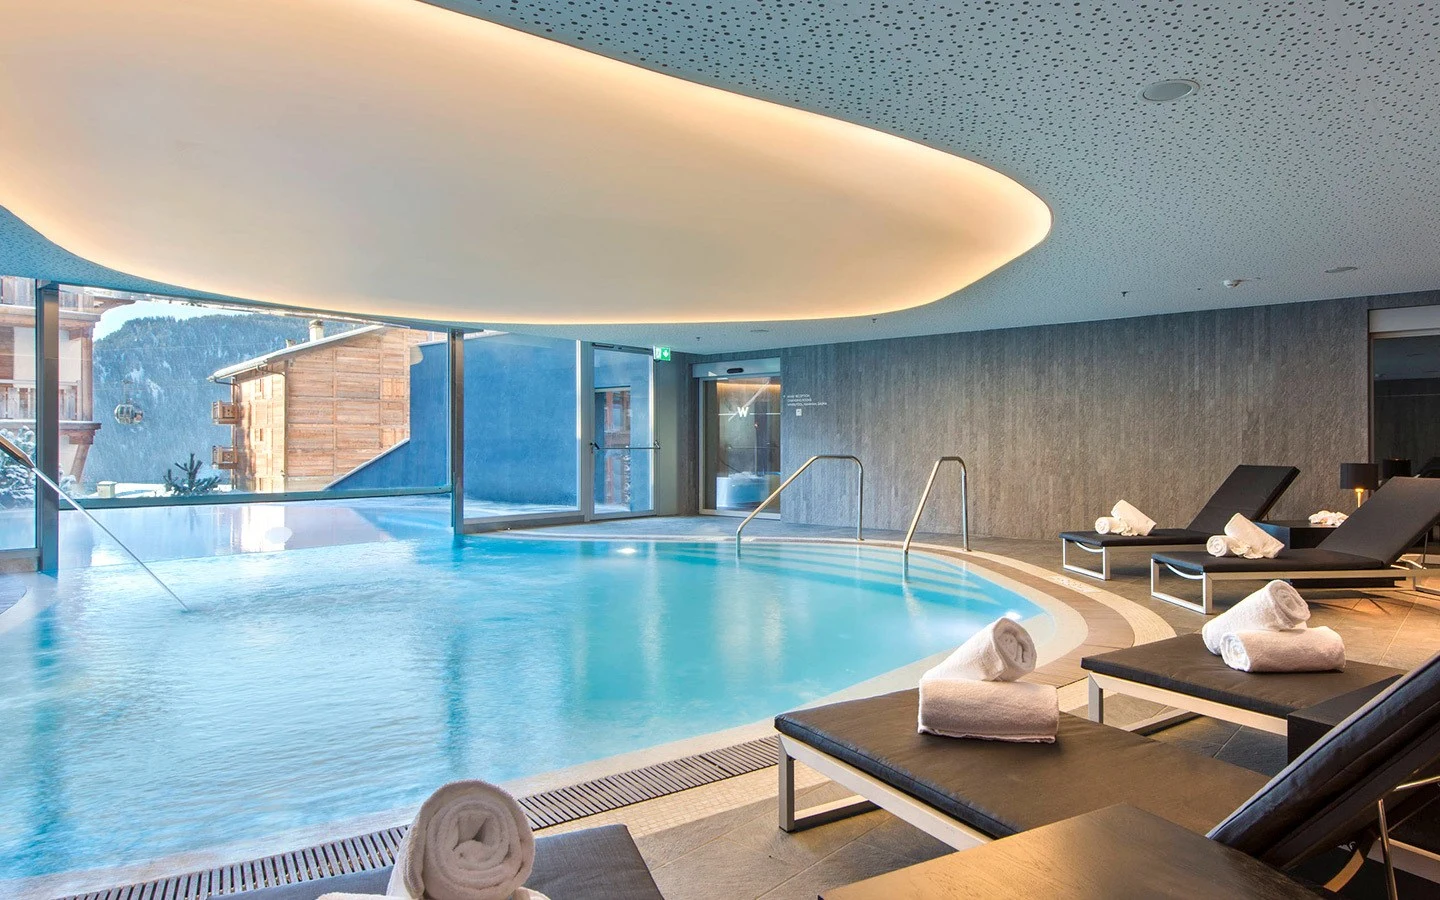 Indoor/outdoor swimming pool and spa at the W Verbier hotel